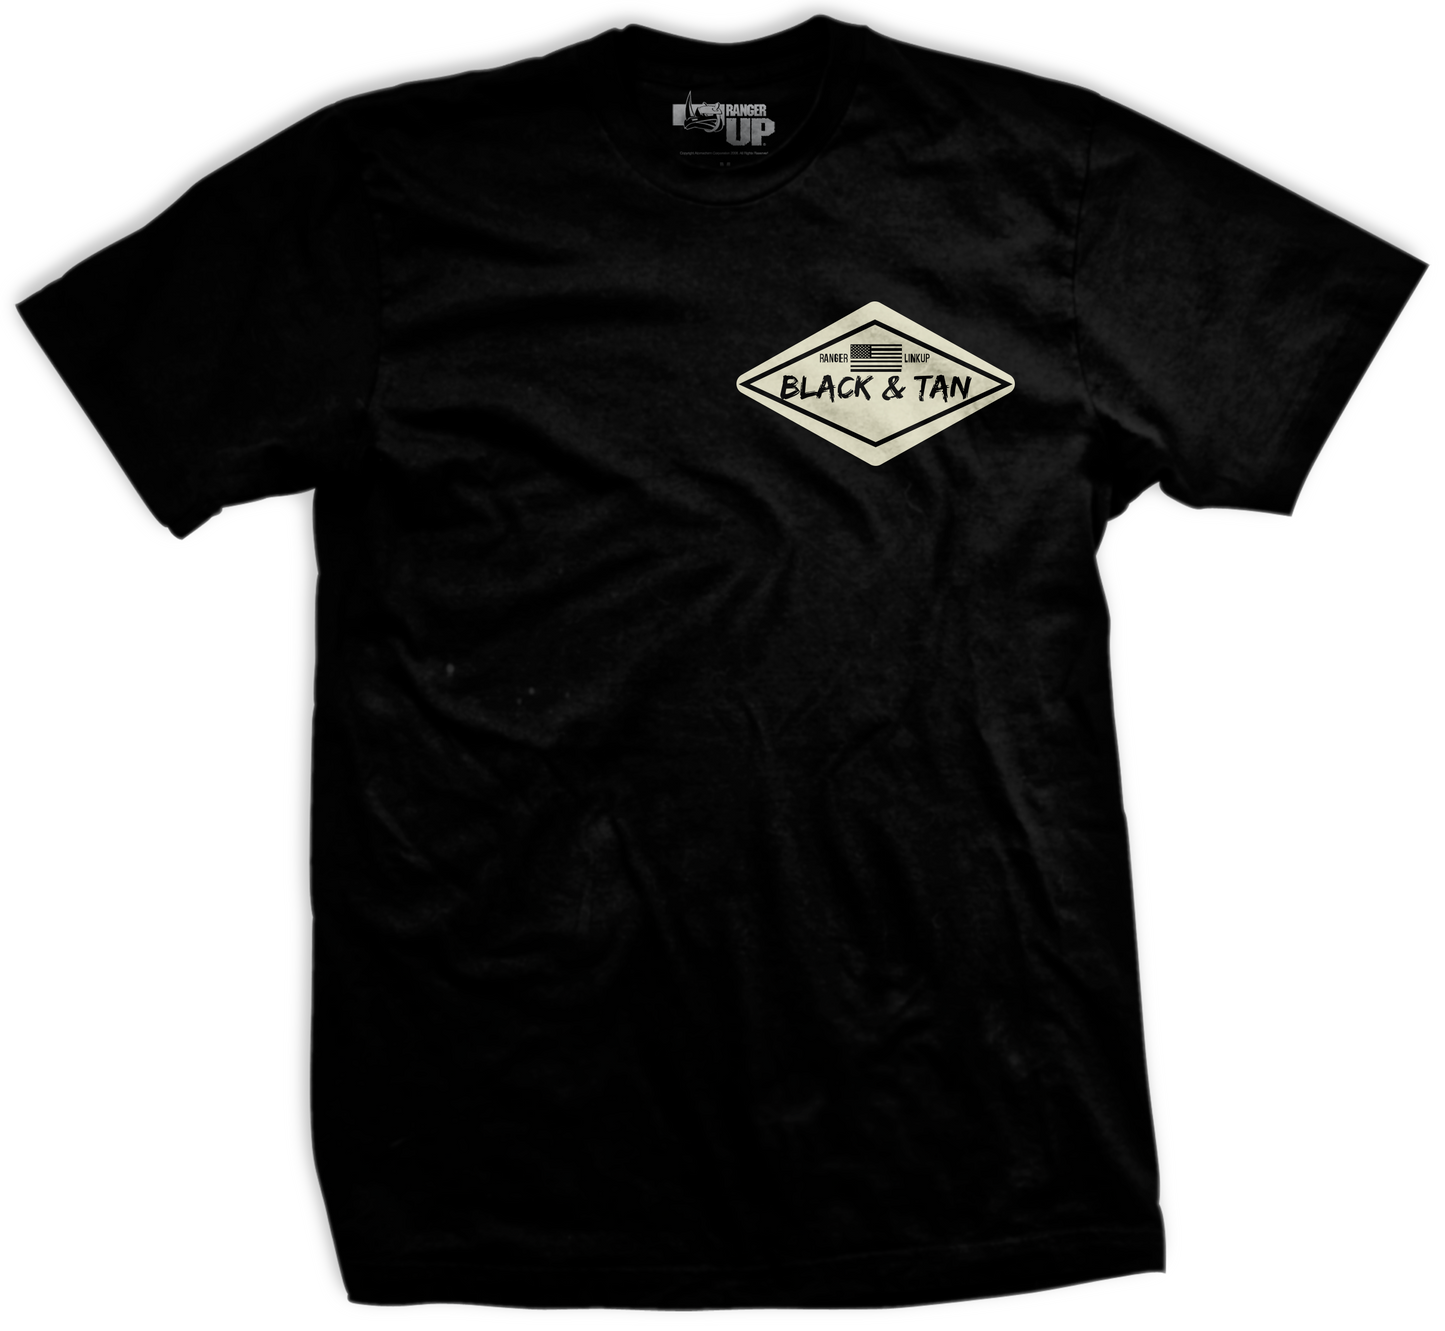 Darby Project Black and Tan T-Shirt